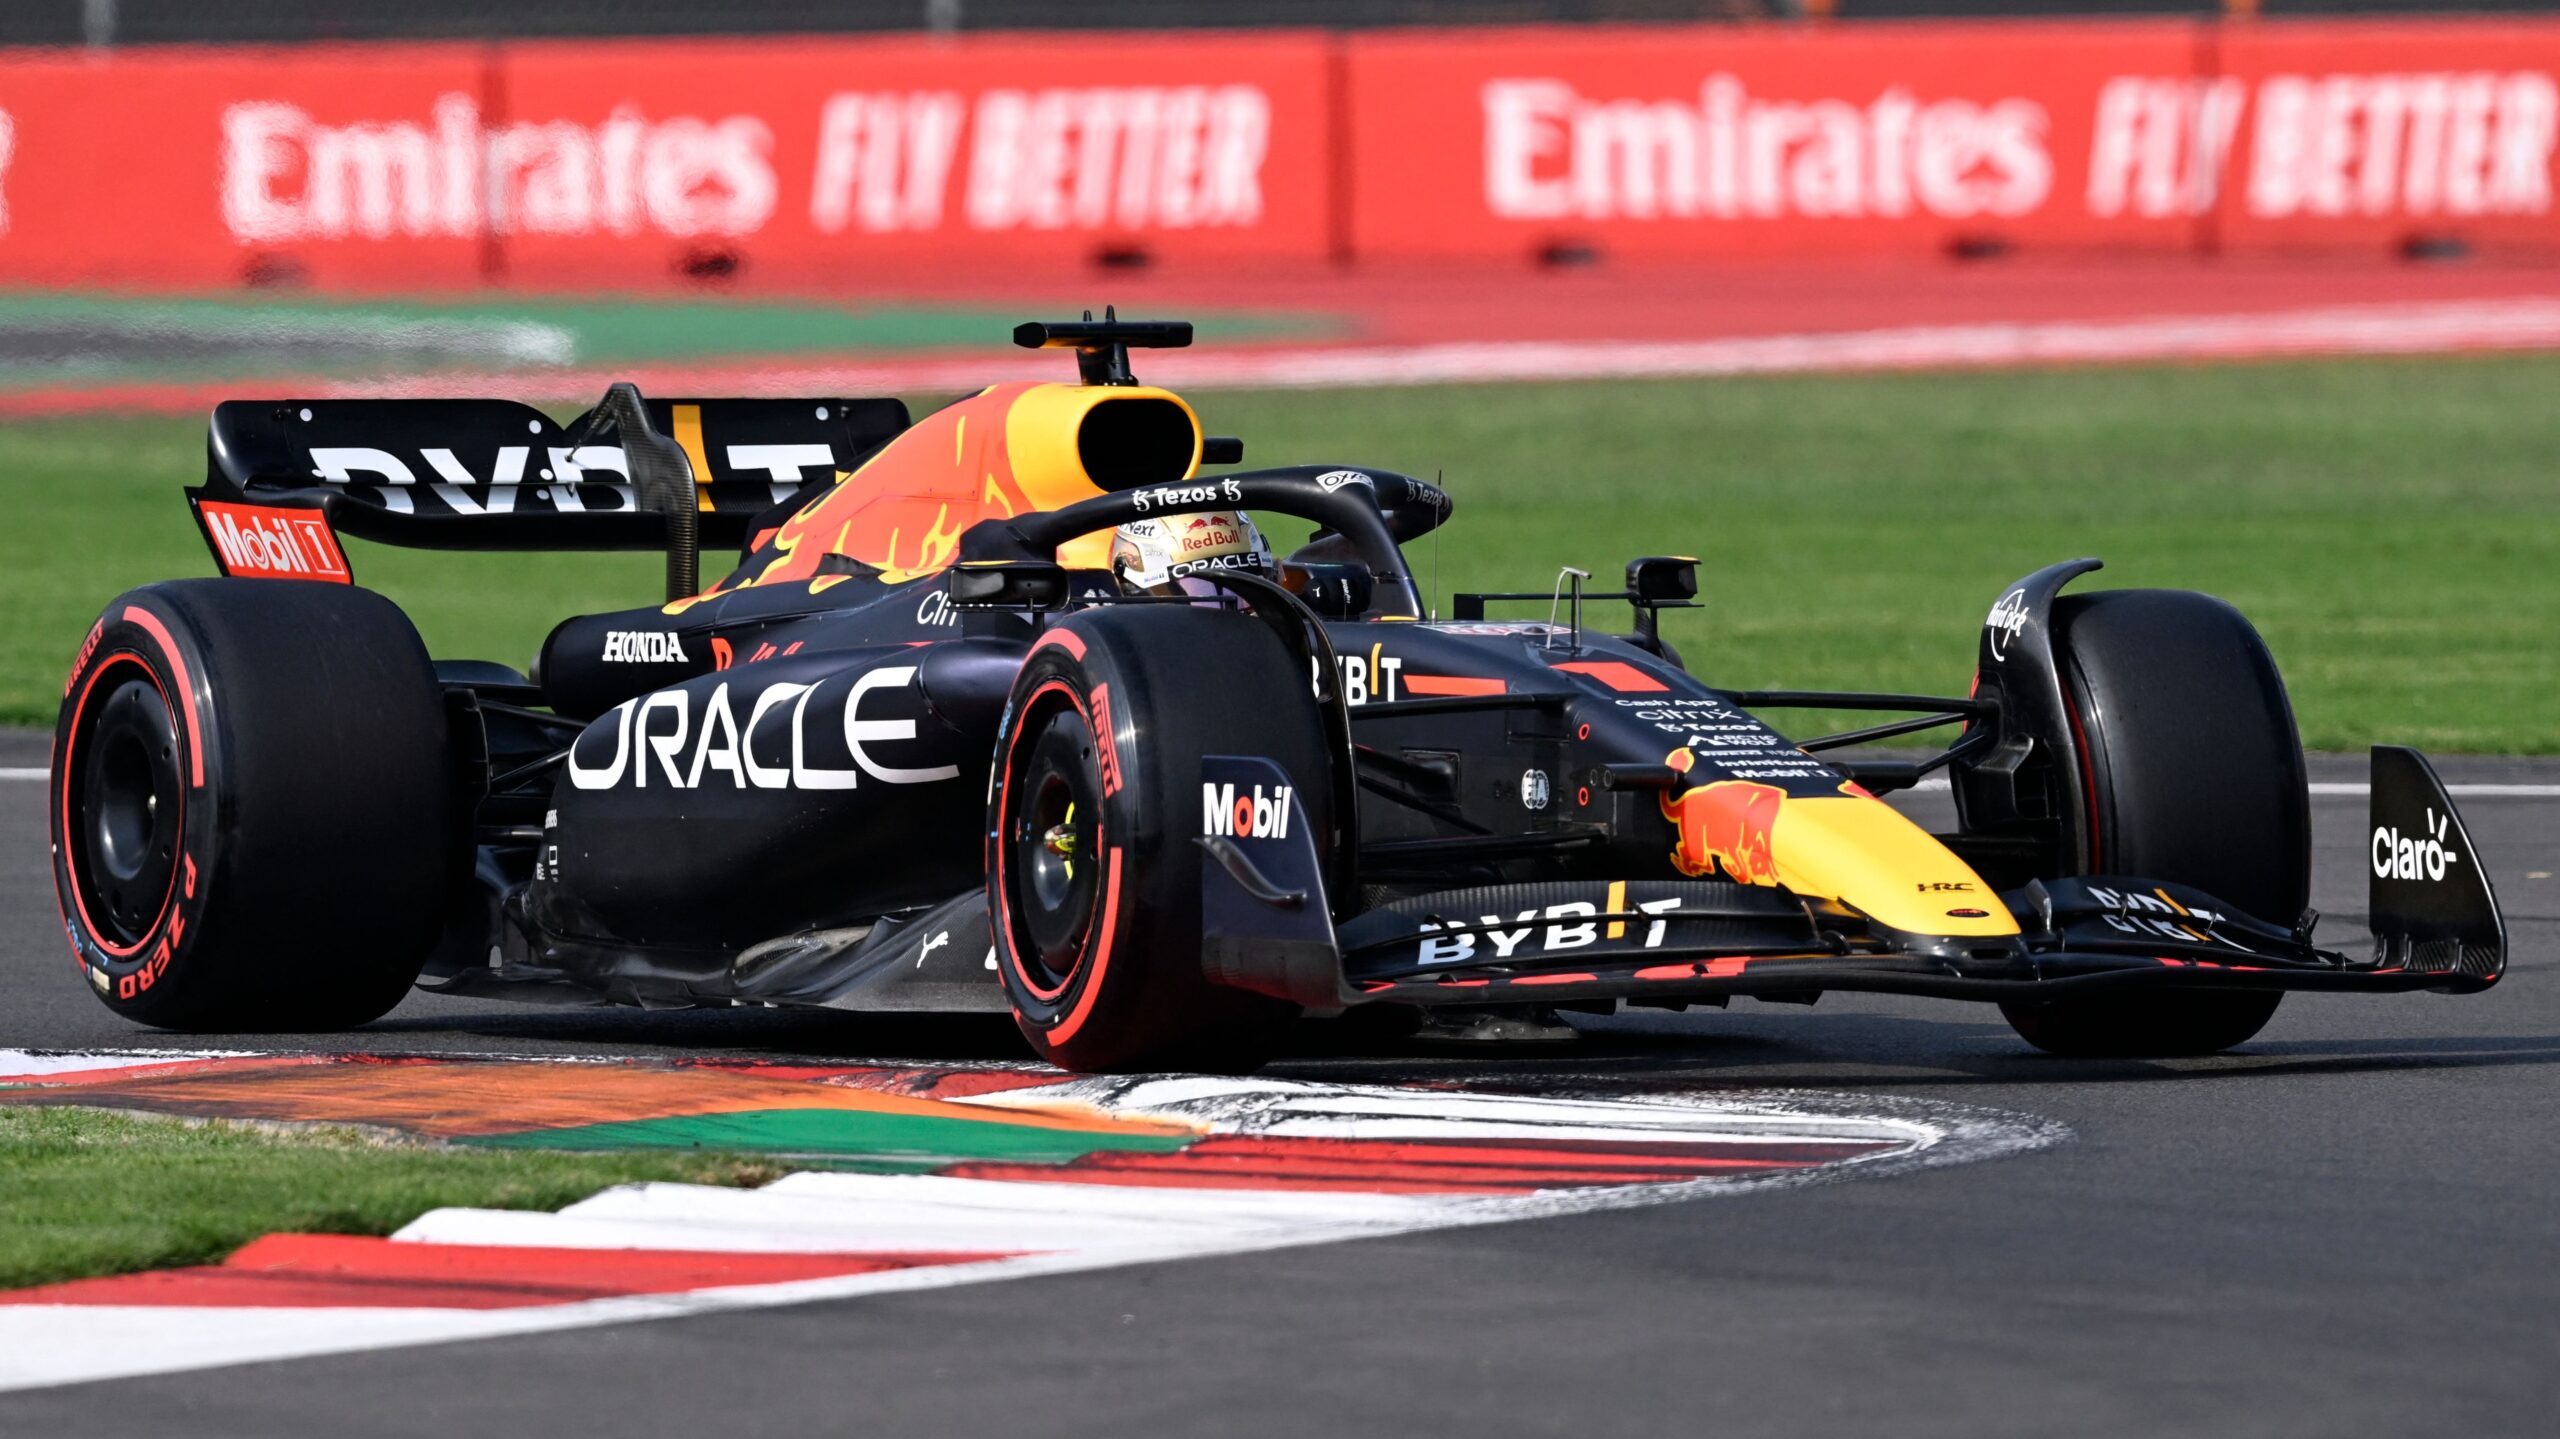 How to watch F1 online for free in 2023